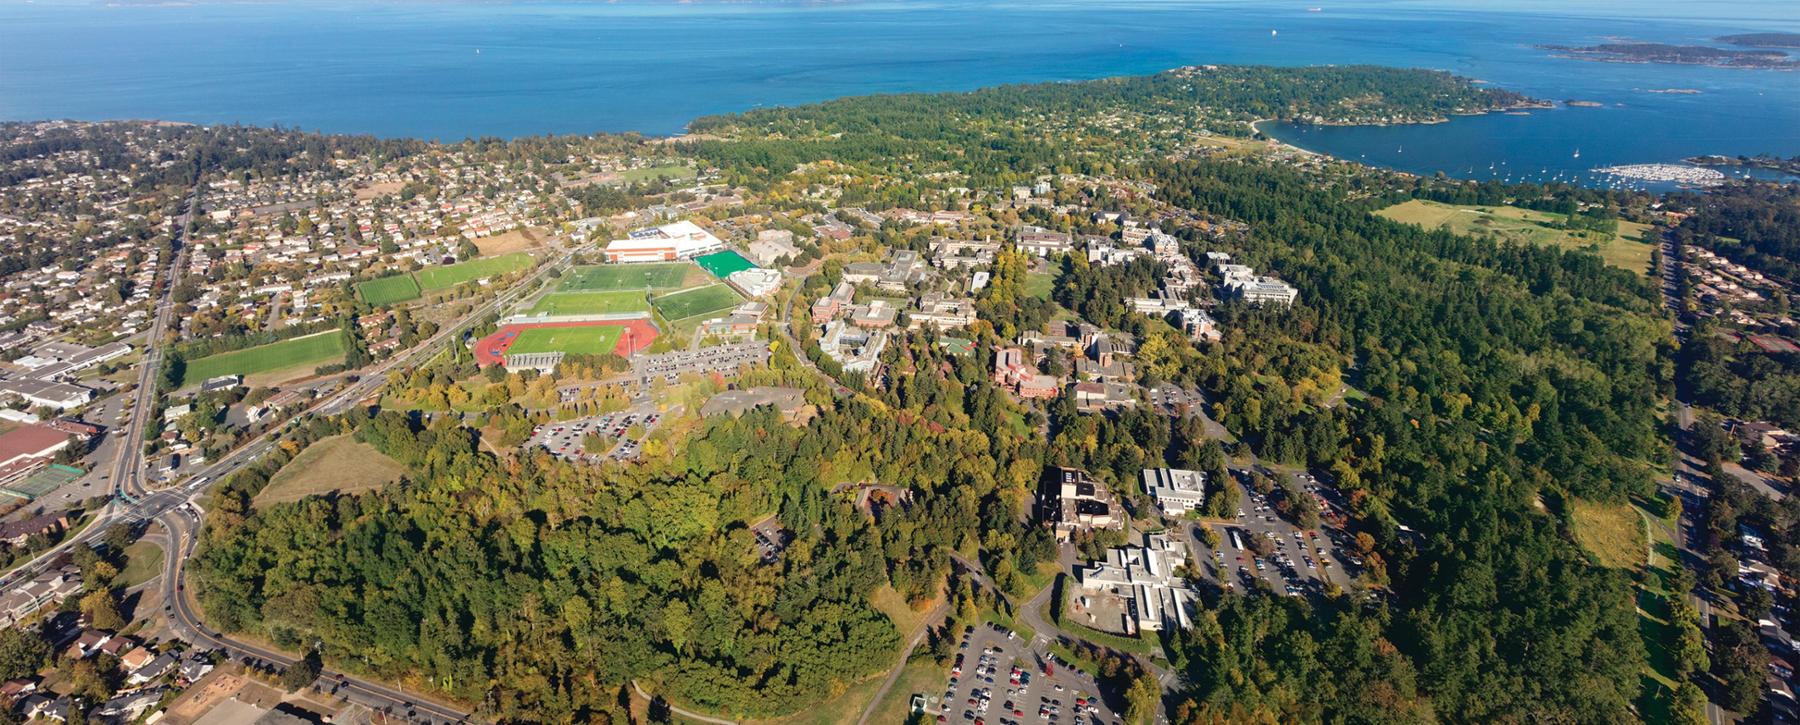 Aerial view of UVic campus and outlying lands